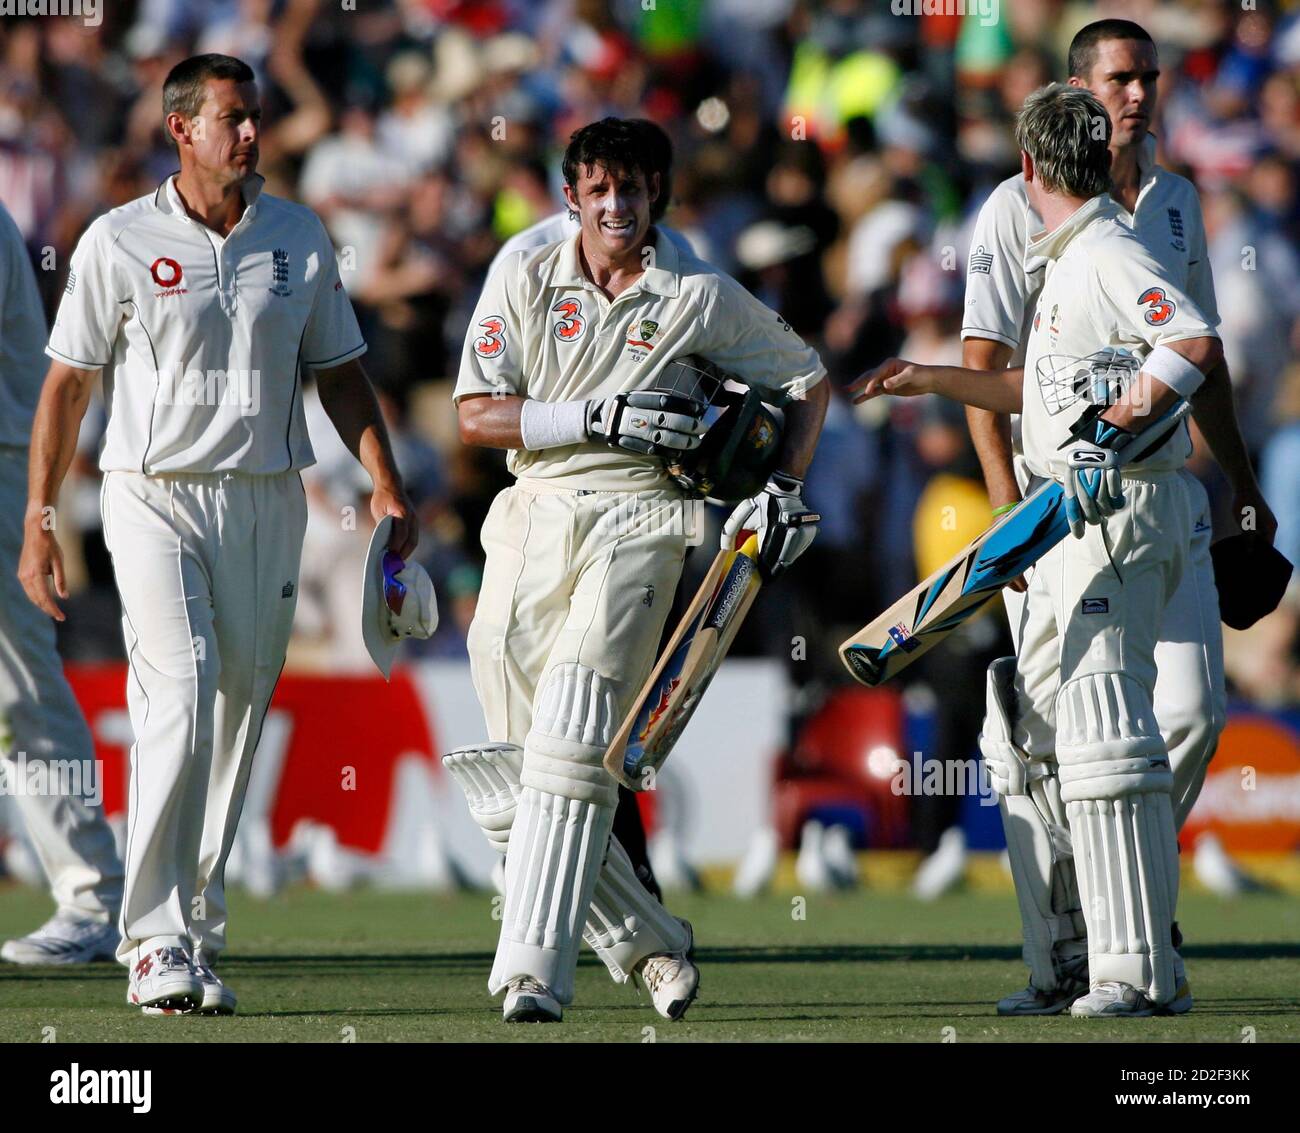 Australia's Michael Hussey (2nd L) walks off the ground with team mate  Michael Clark (2nd R) as England players Ashley Giles (L) and Kevin  Pietersen walk away after Australia won the second